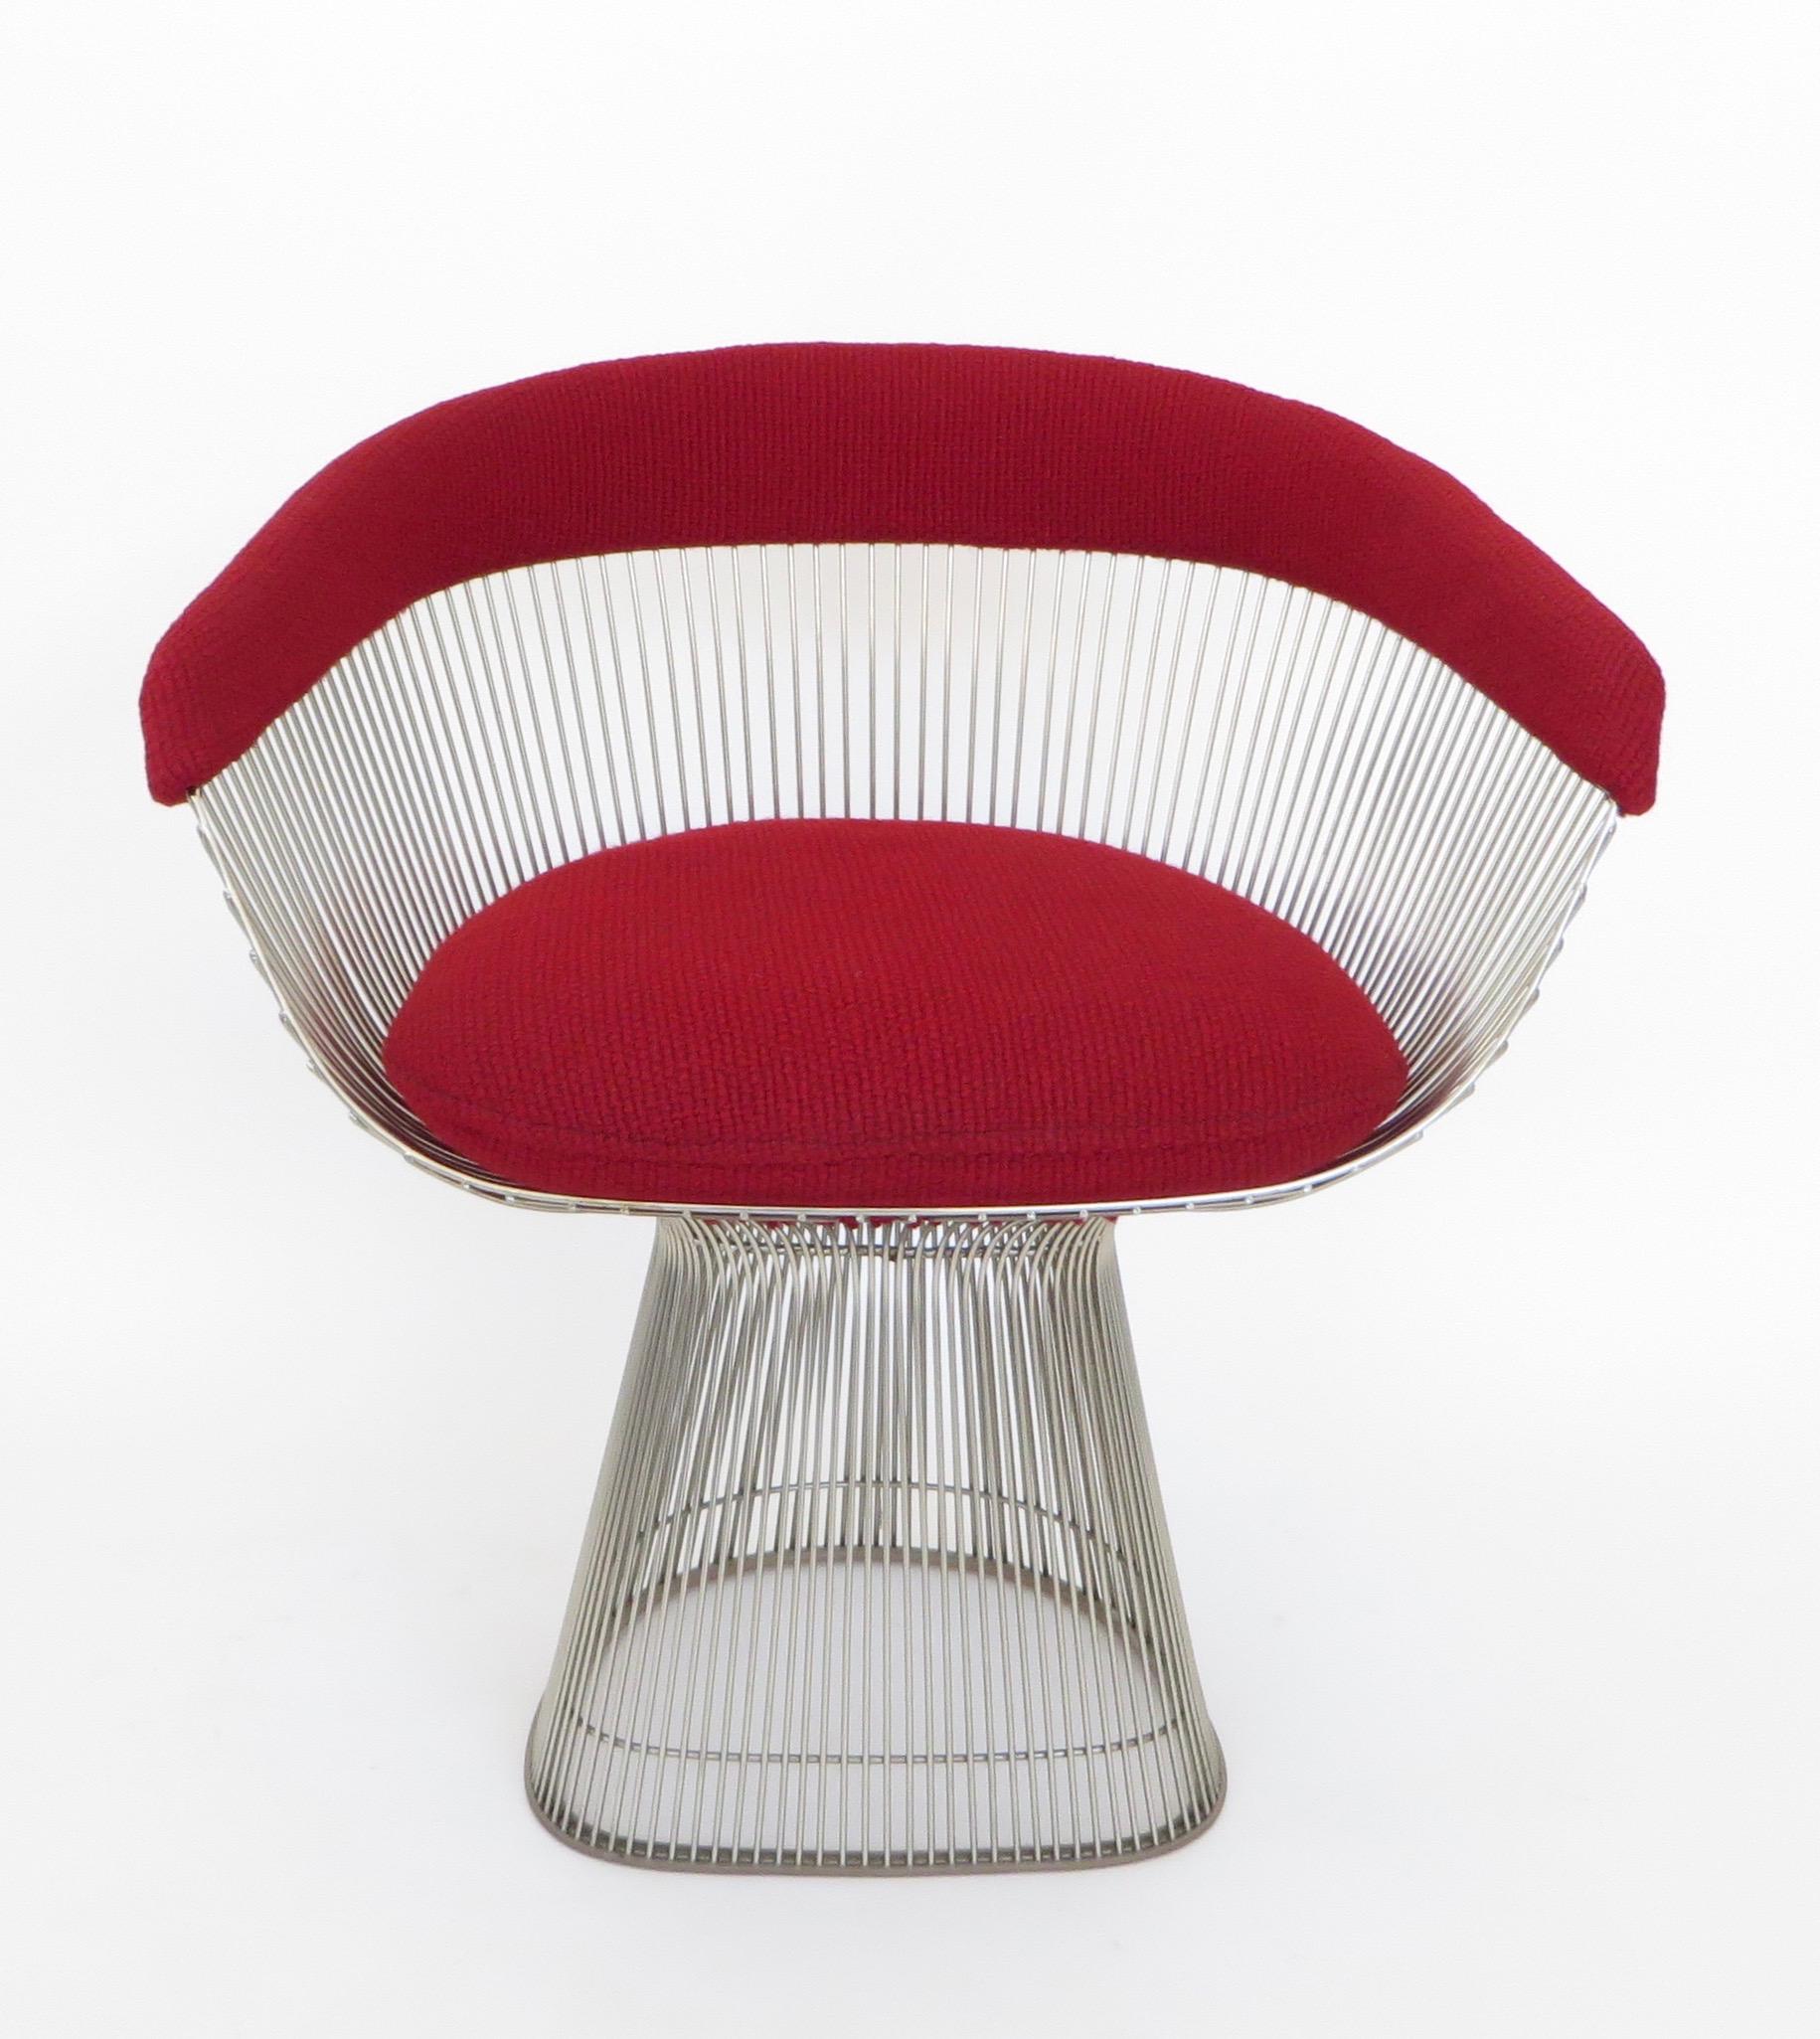 Four Warren Platner dining chairs for Knoll International, circa 1980.
These chairs have their original Knoll dark red bouclé fabric and original Knoll International tags.
The provenance of this set of four chairs is from the Morton Salt Executive